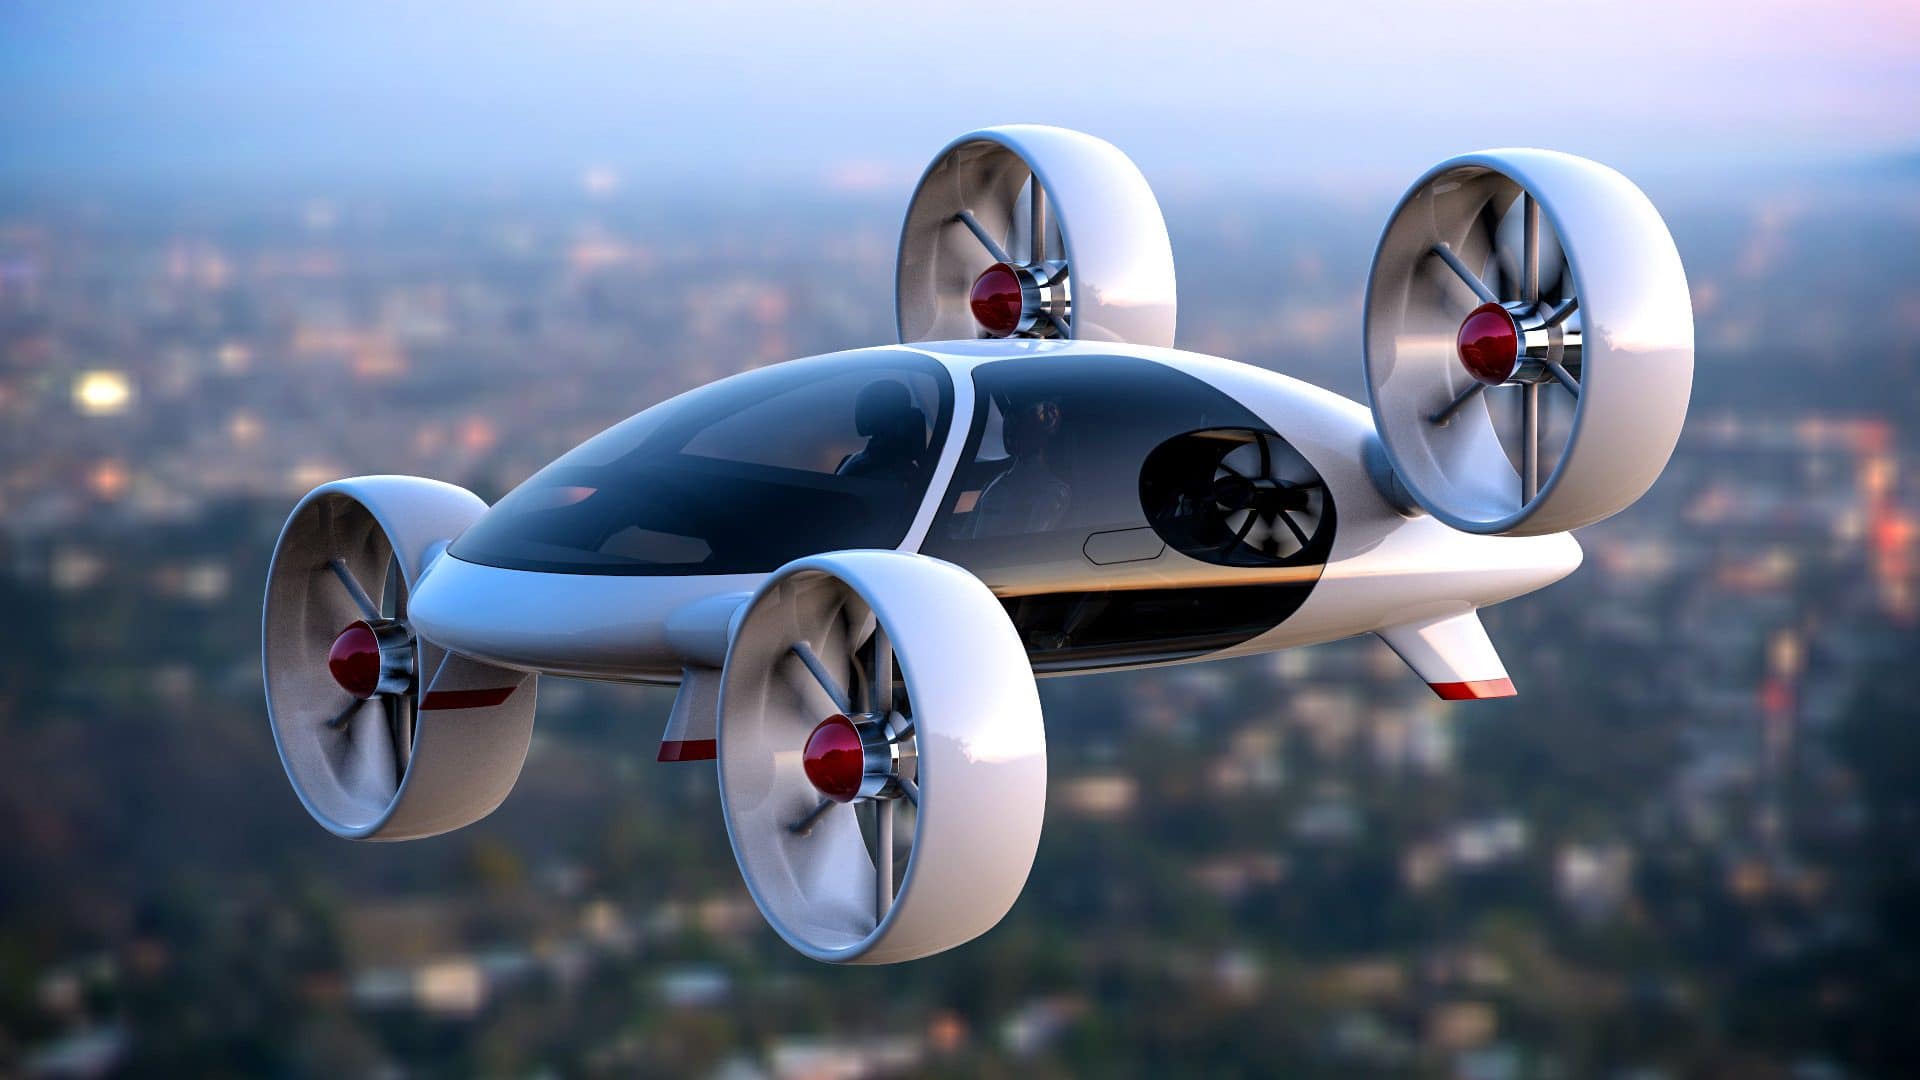 McFly.aero Launches Flying Taxis ICO Blockchain News, Opinion, TV and